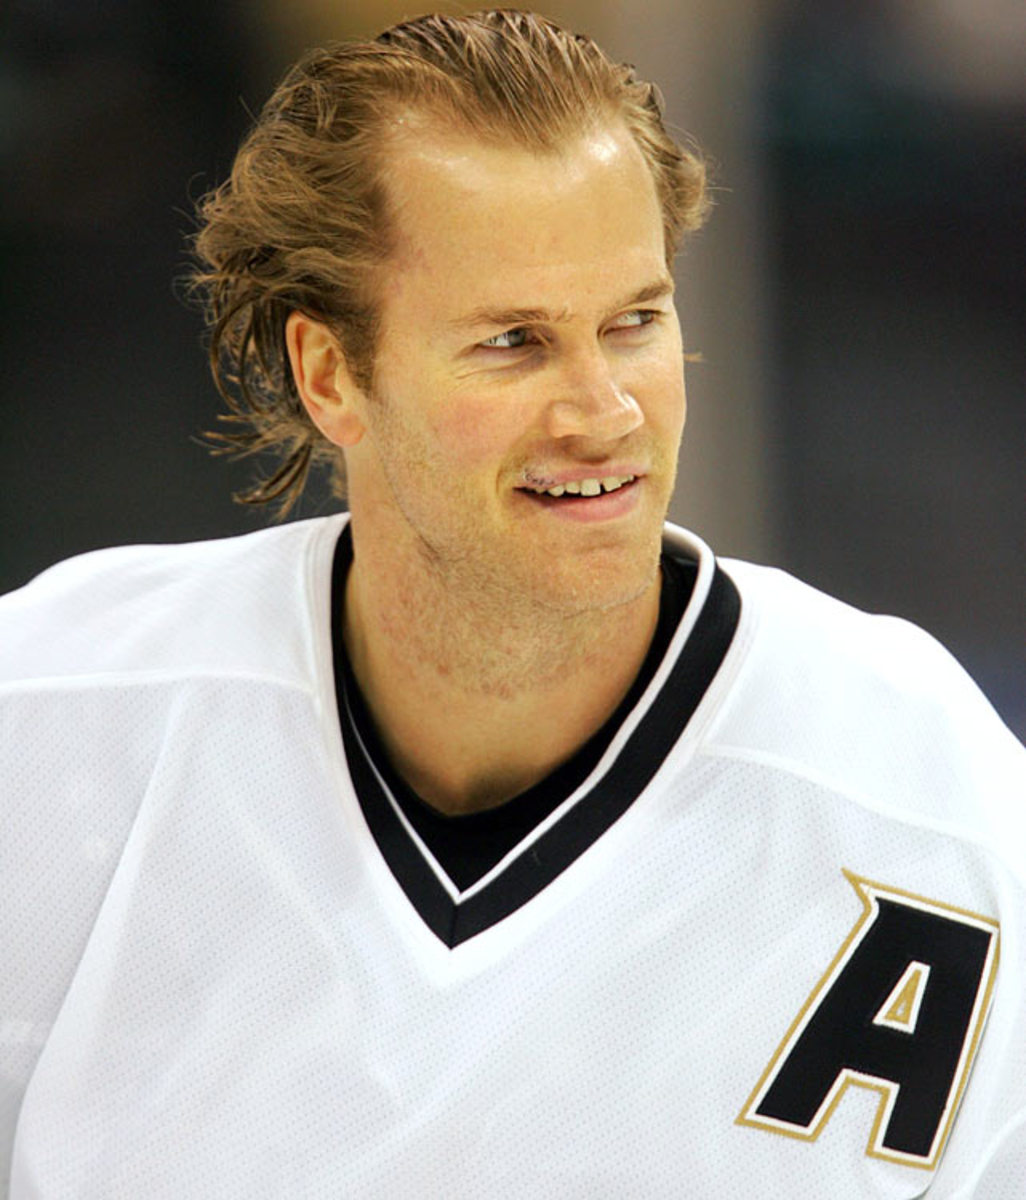 Minnesota and mullets: The grand tradition of hockey hair